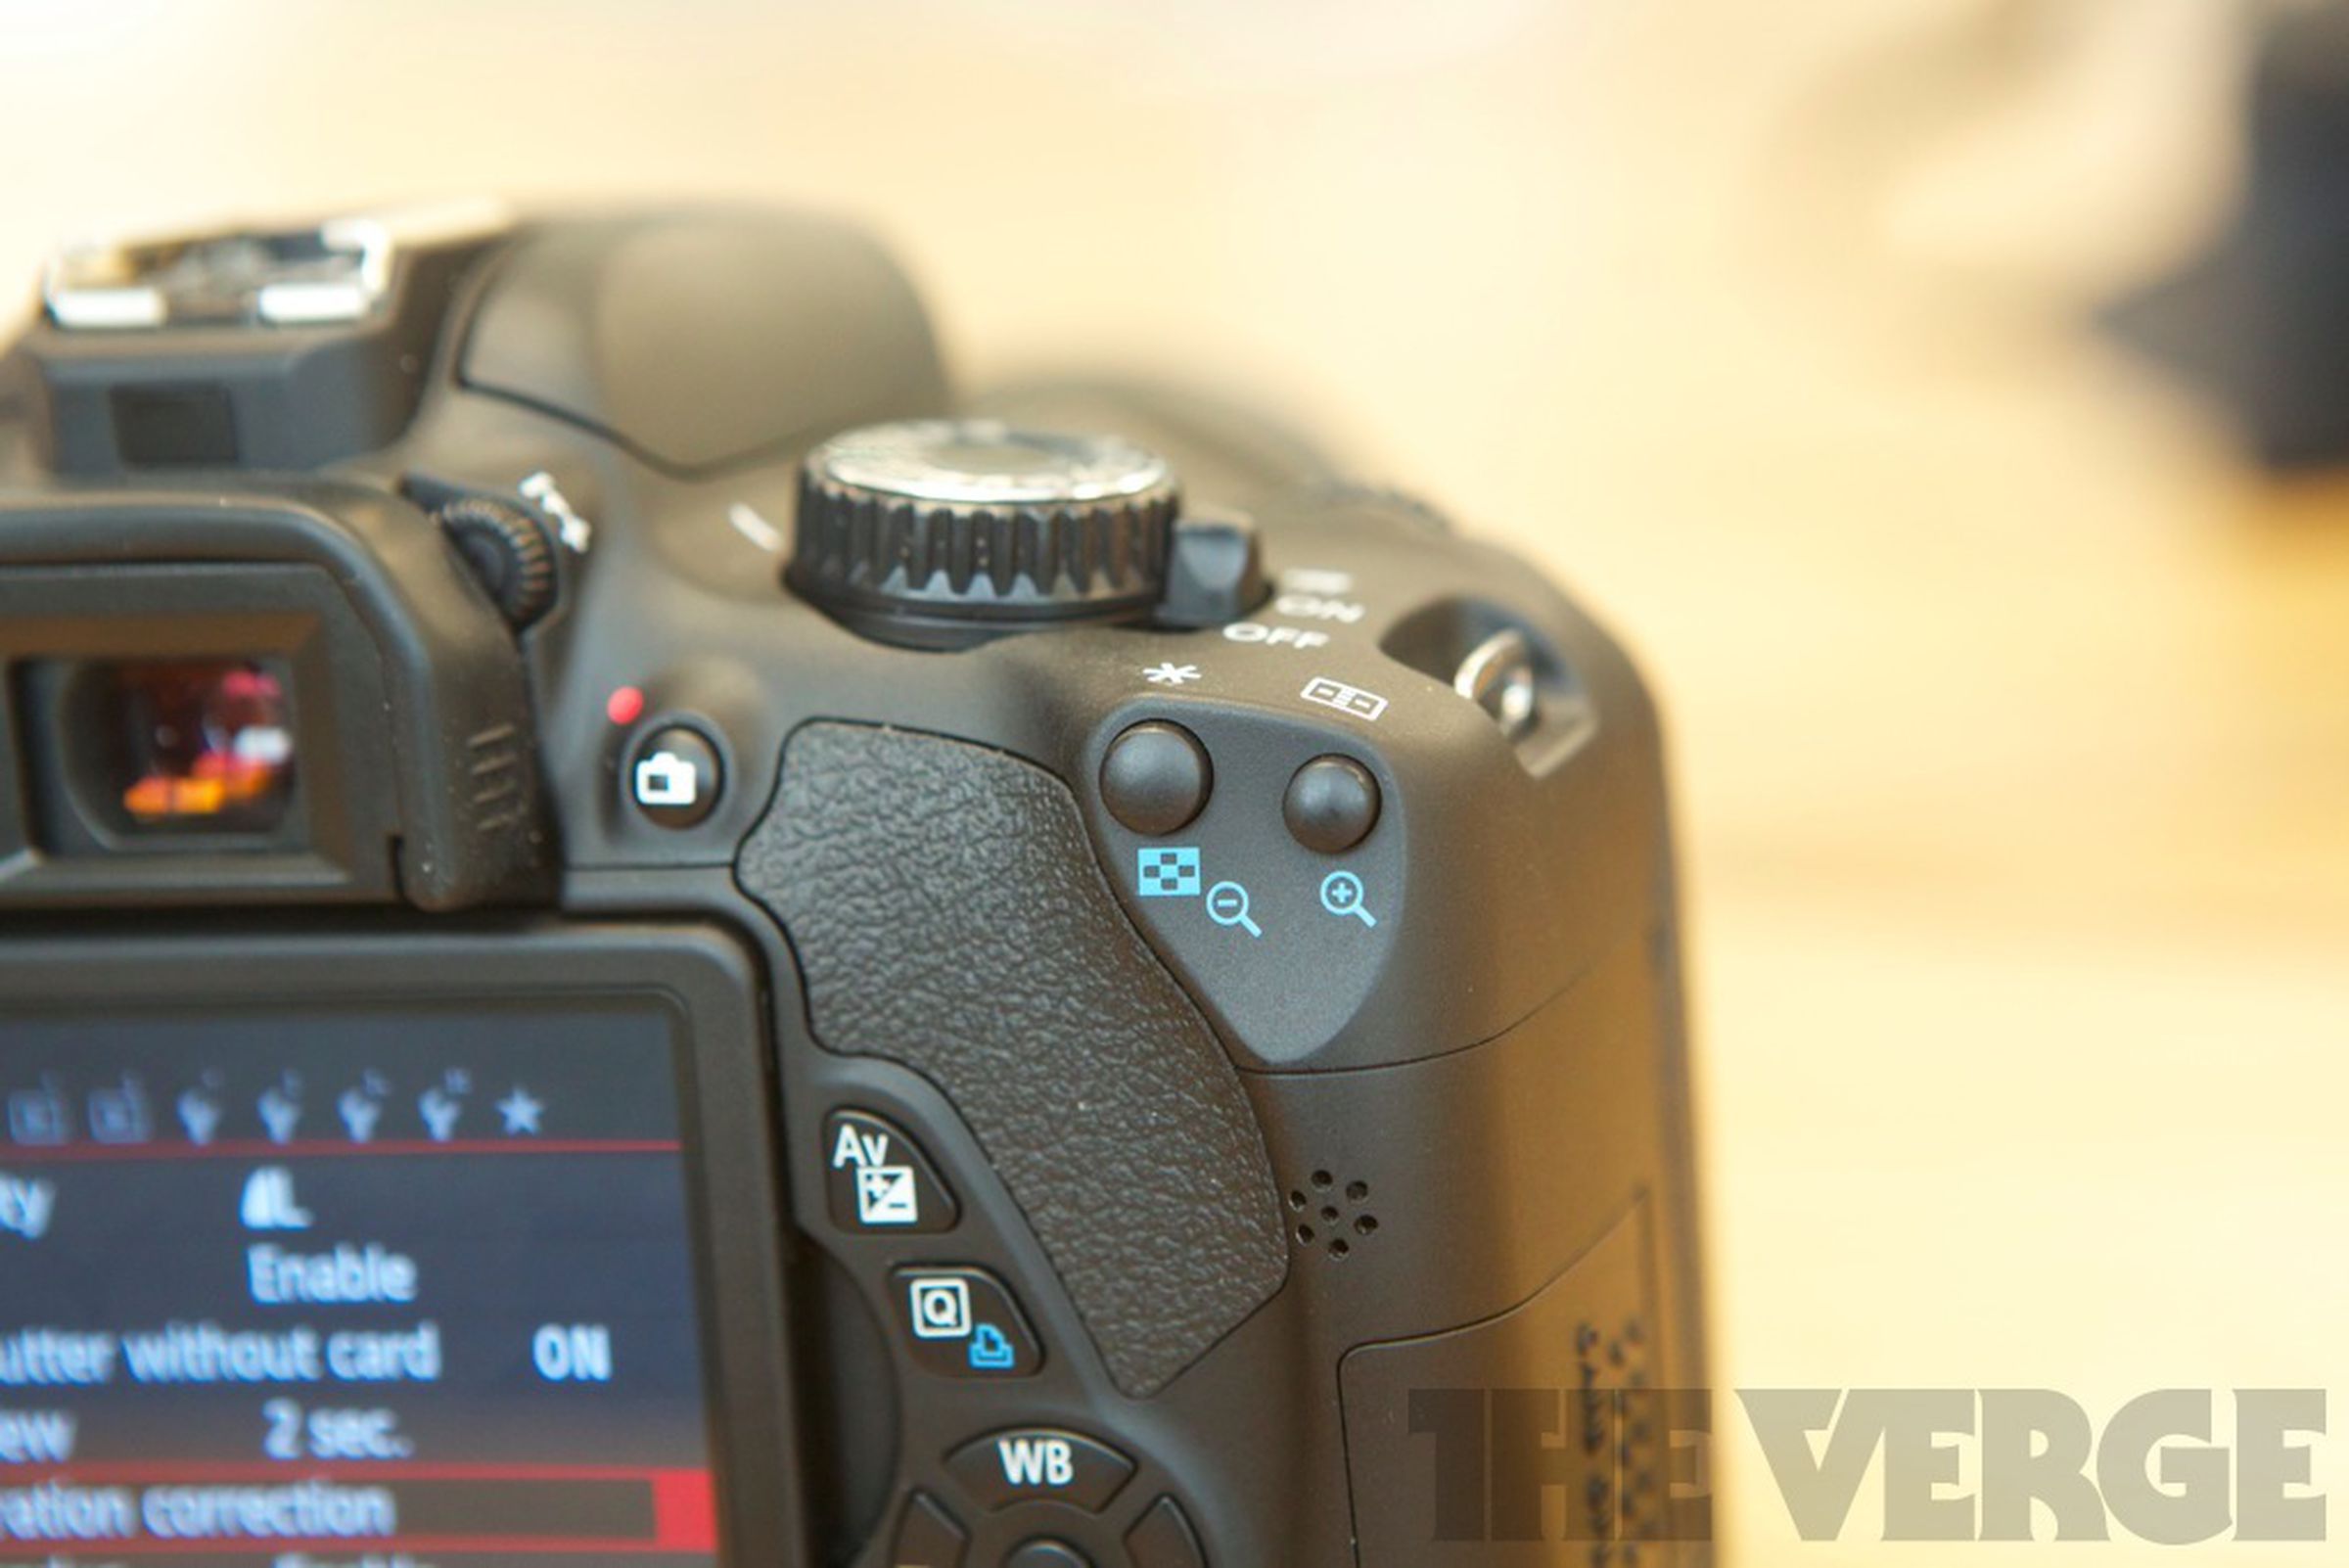 Canon Rebel T4i hands-on pictures